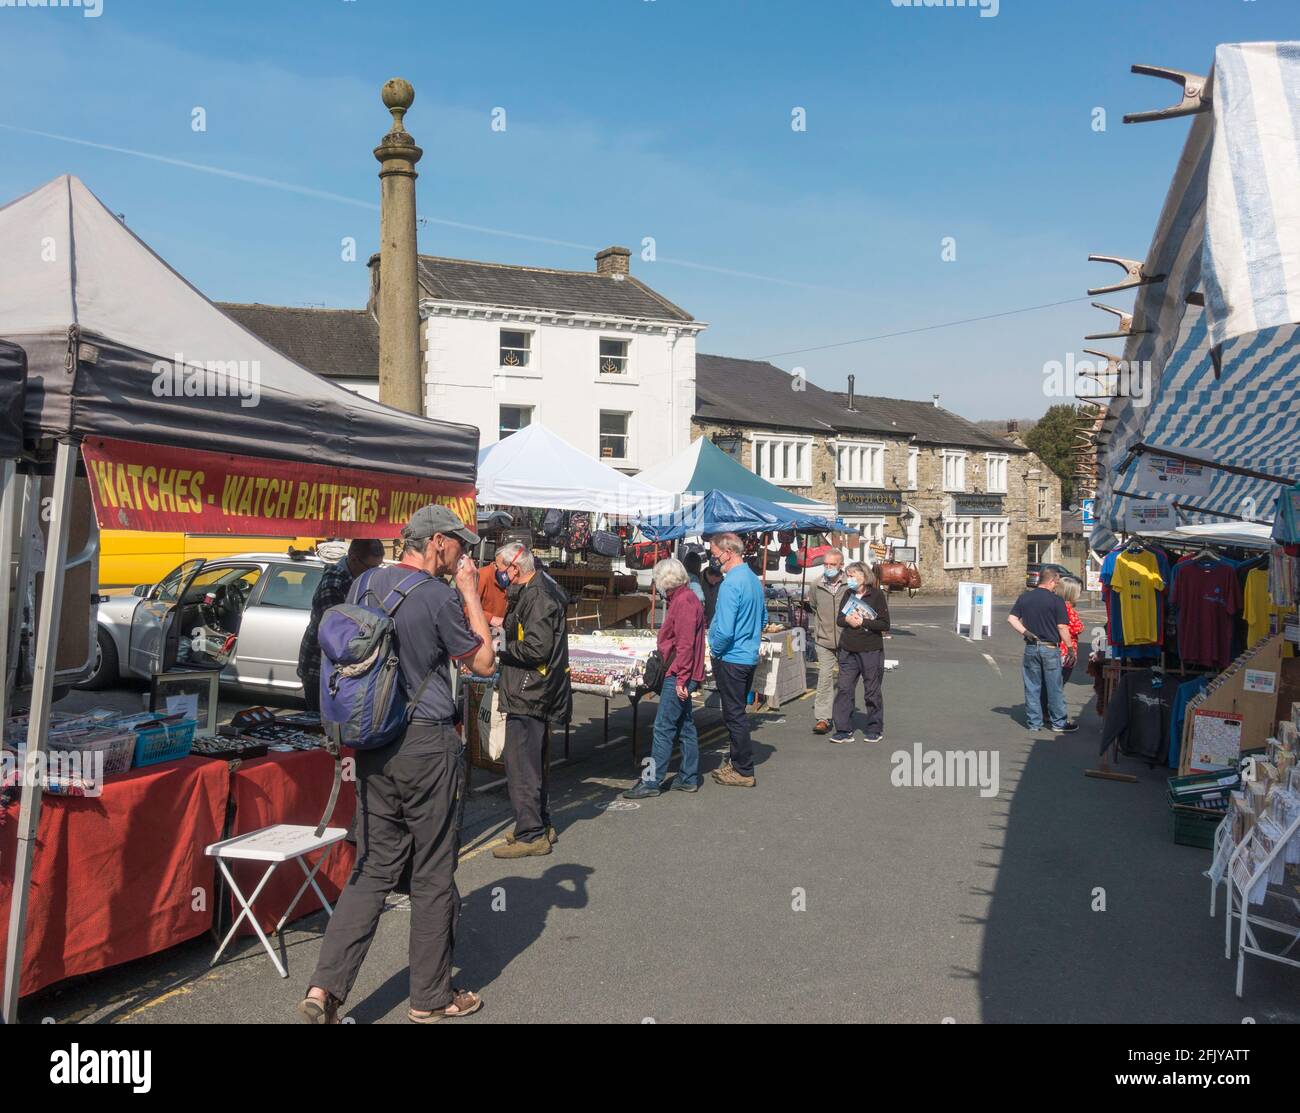 Shoppers in the the outdoor street market in Settle, Yorkshire, England, UK Stock Photo